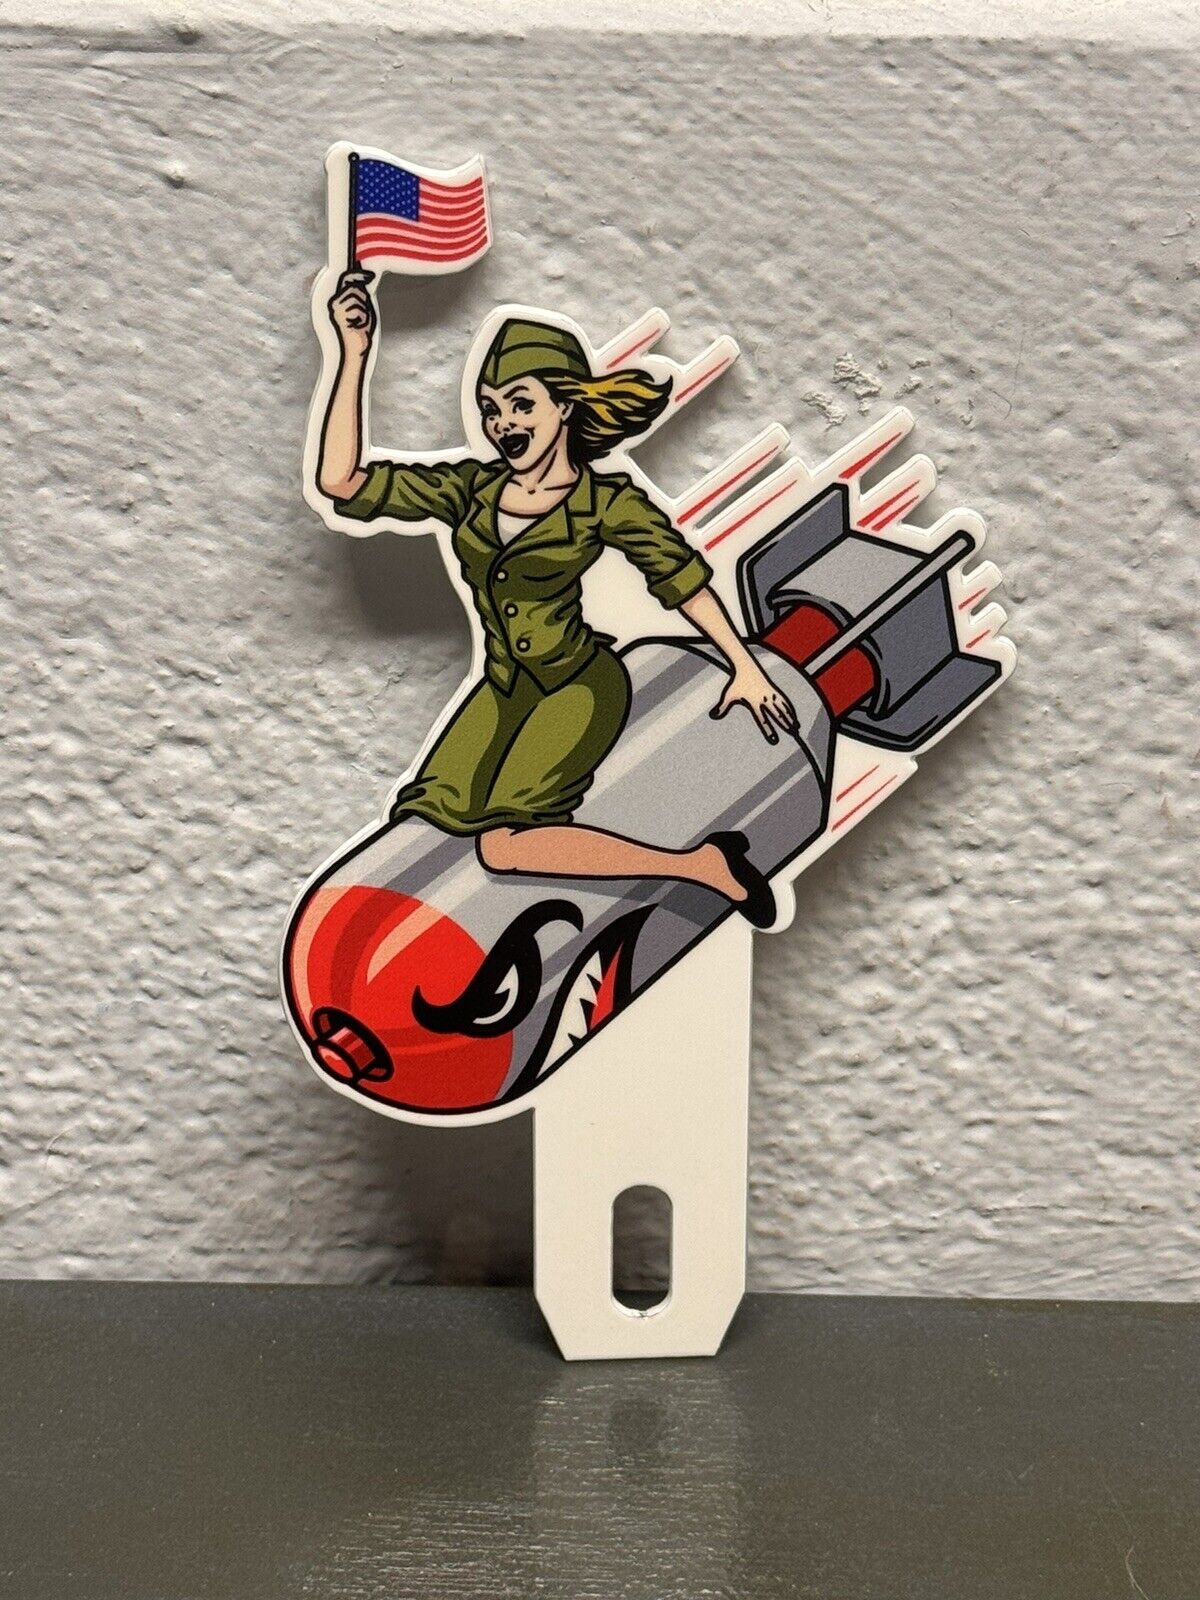 American Patriotic Atomic Bomb Girl Thick Metal Plate Topper Pin Up Sign Gas Oil